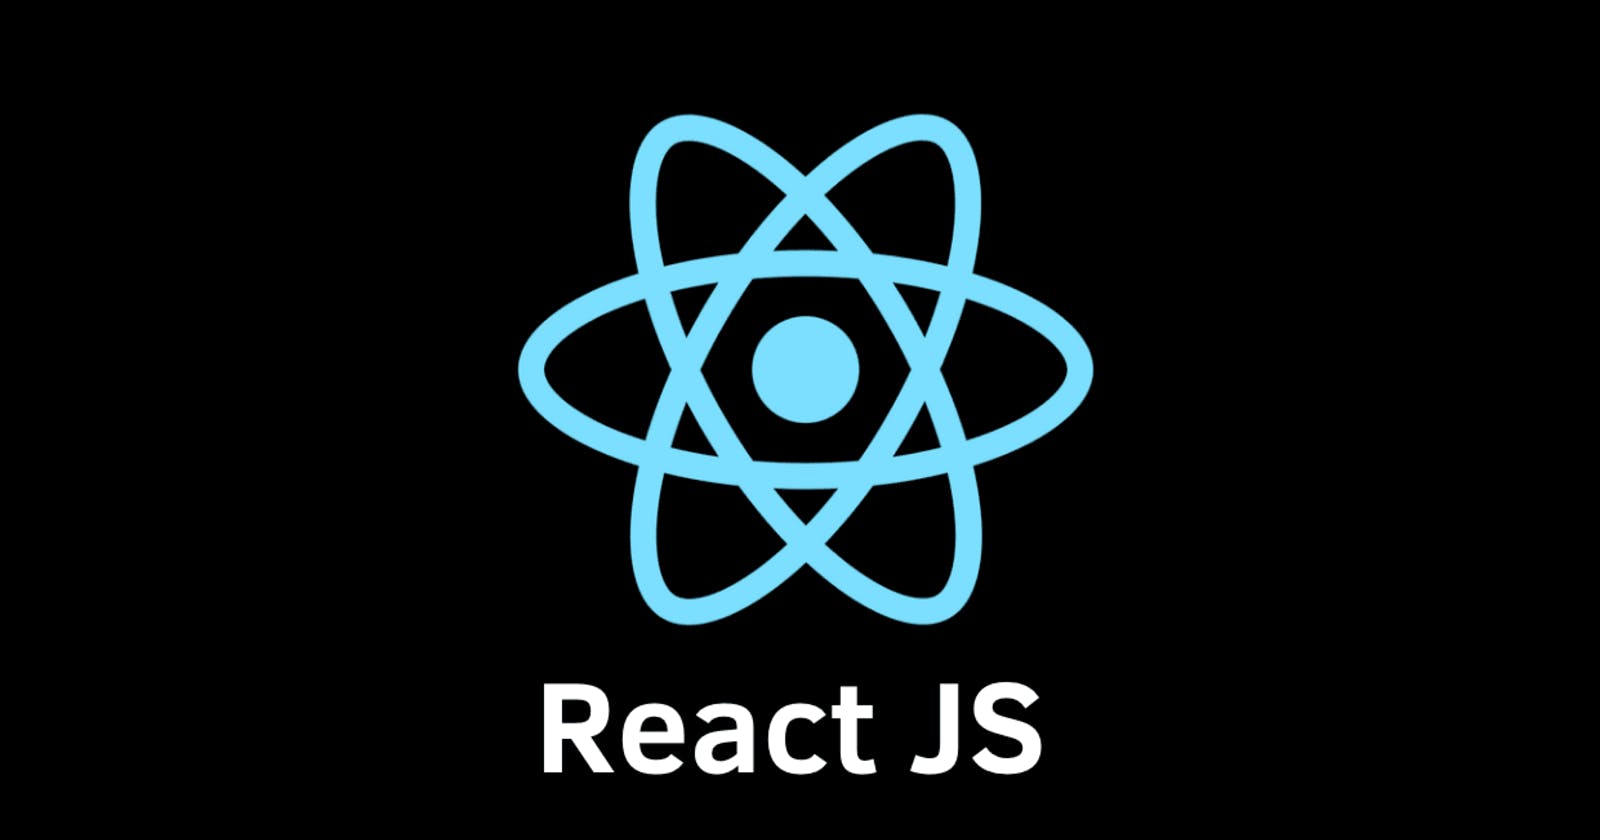 Day 3 - What are fragments in React?